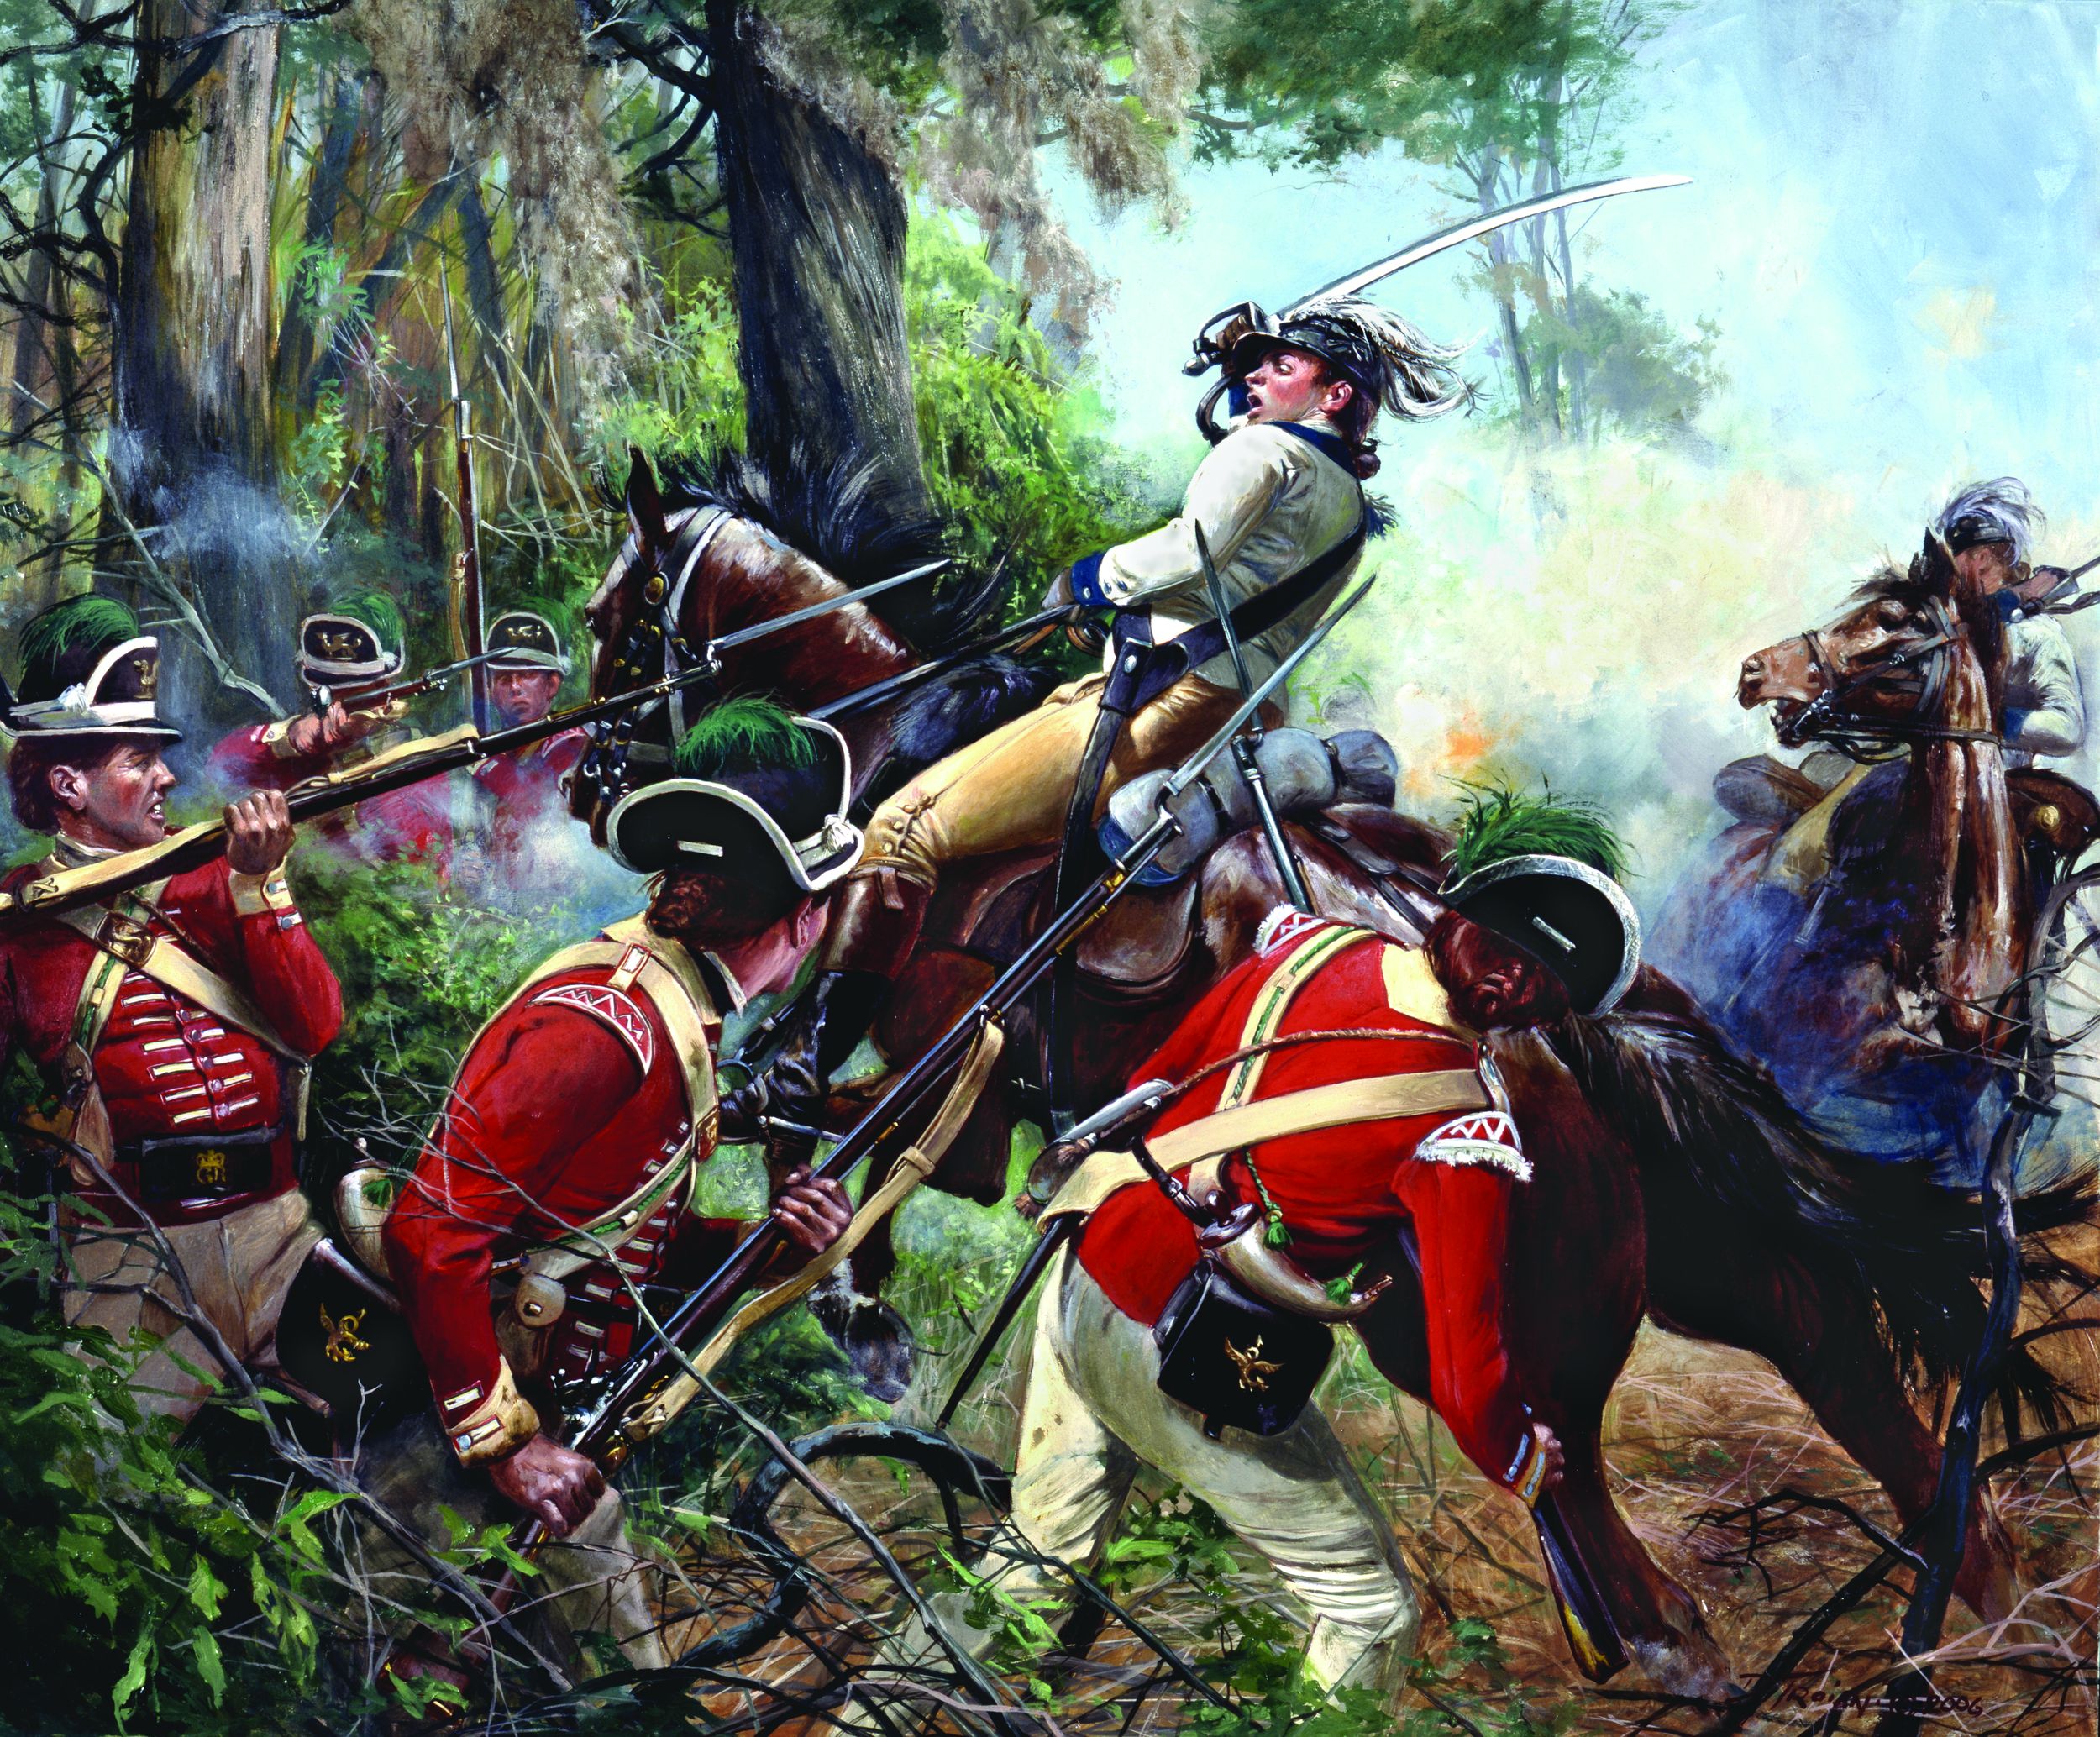 Sword-wielding Lt. Col. William Washington, leading the 3rd Continental Dragoons, is surrounded and captured by British redcoats at the Battle of Eutaw Springs. Painting by Don Troiani.